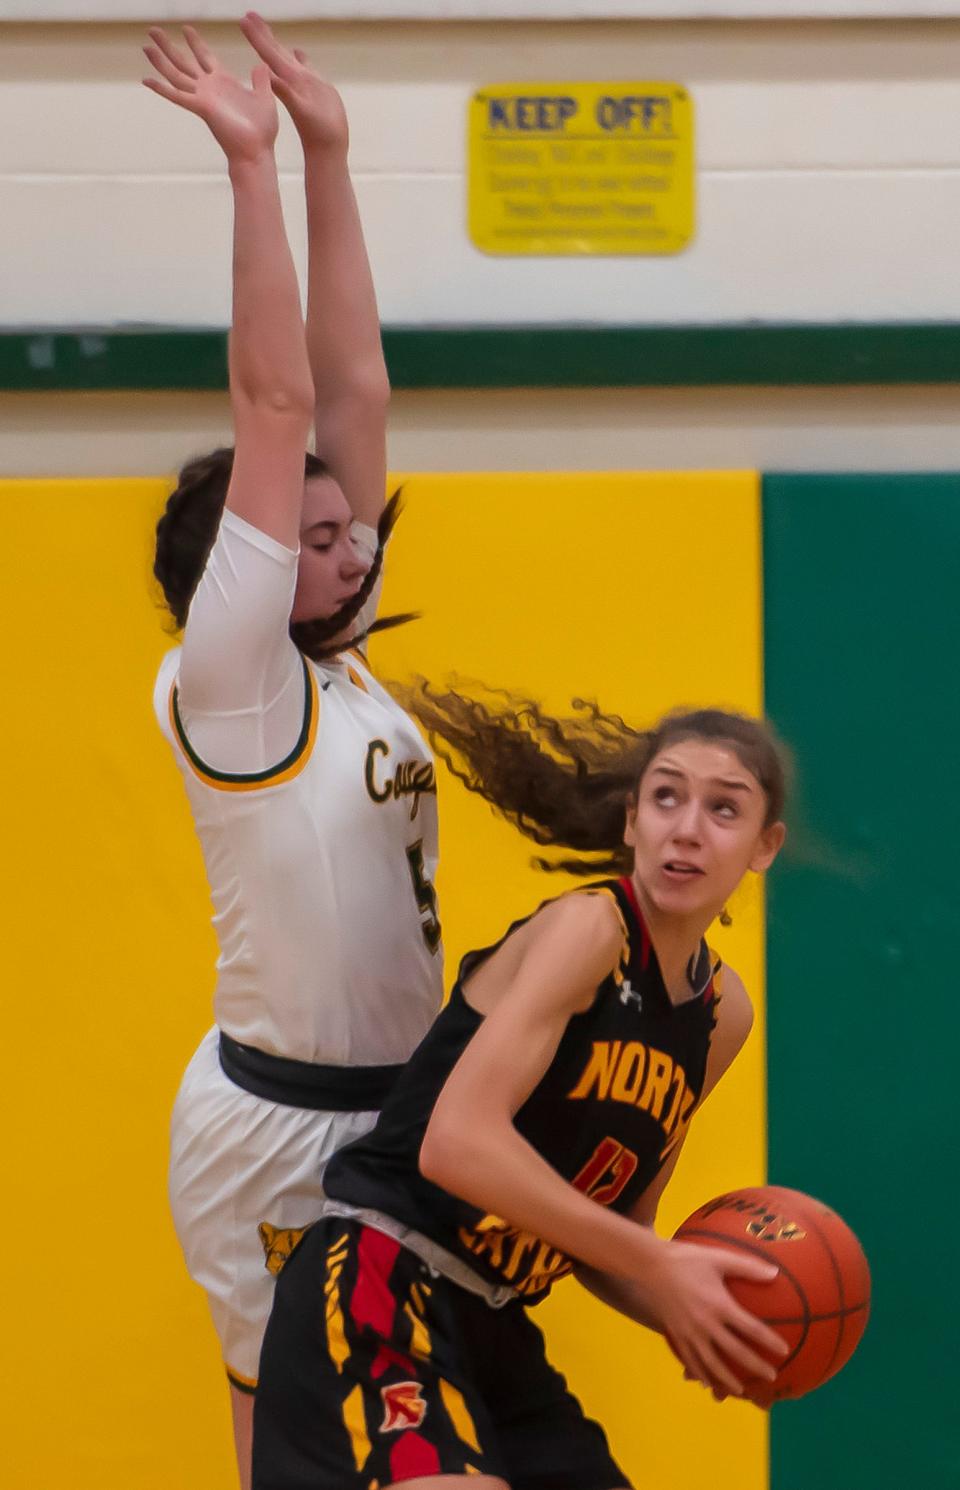 Blackhawk's Quinn Borroni tries to block North Catholic's Kaitlyn Tavella during their game Saturday at Blackhawk High Scholl. [Lucy Schaly/For BCT]